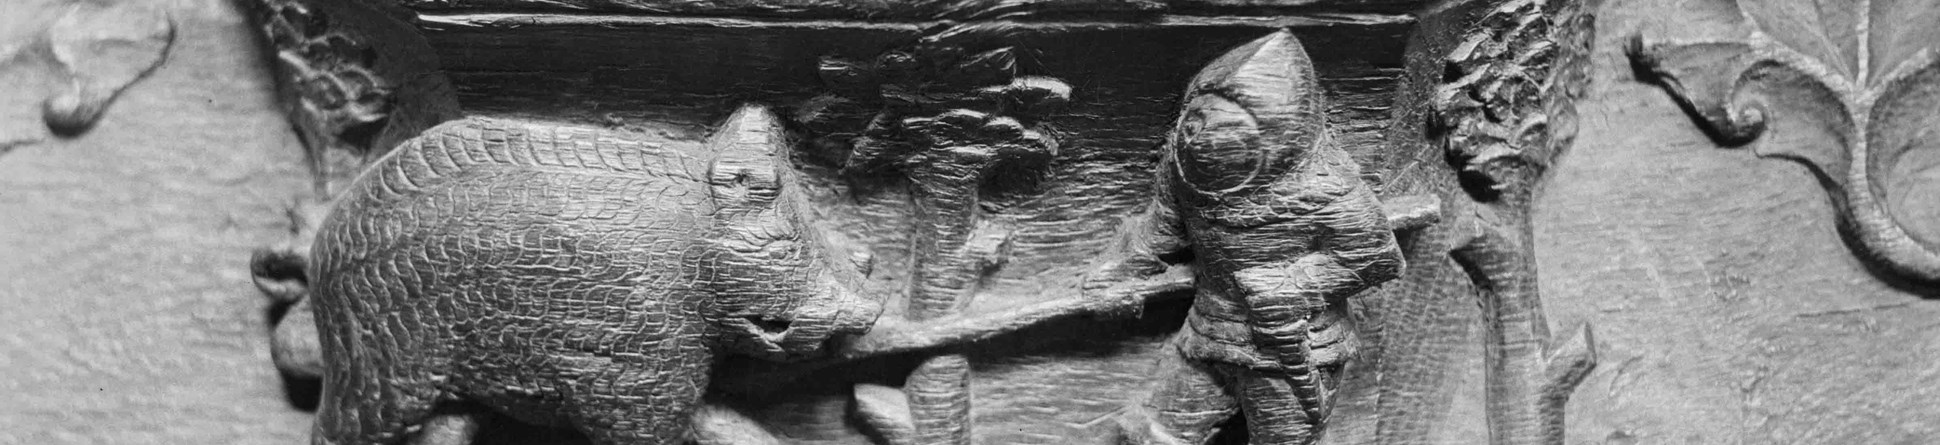 Wood carving of misericord